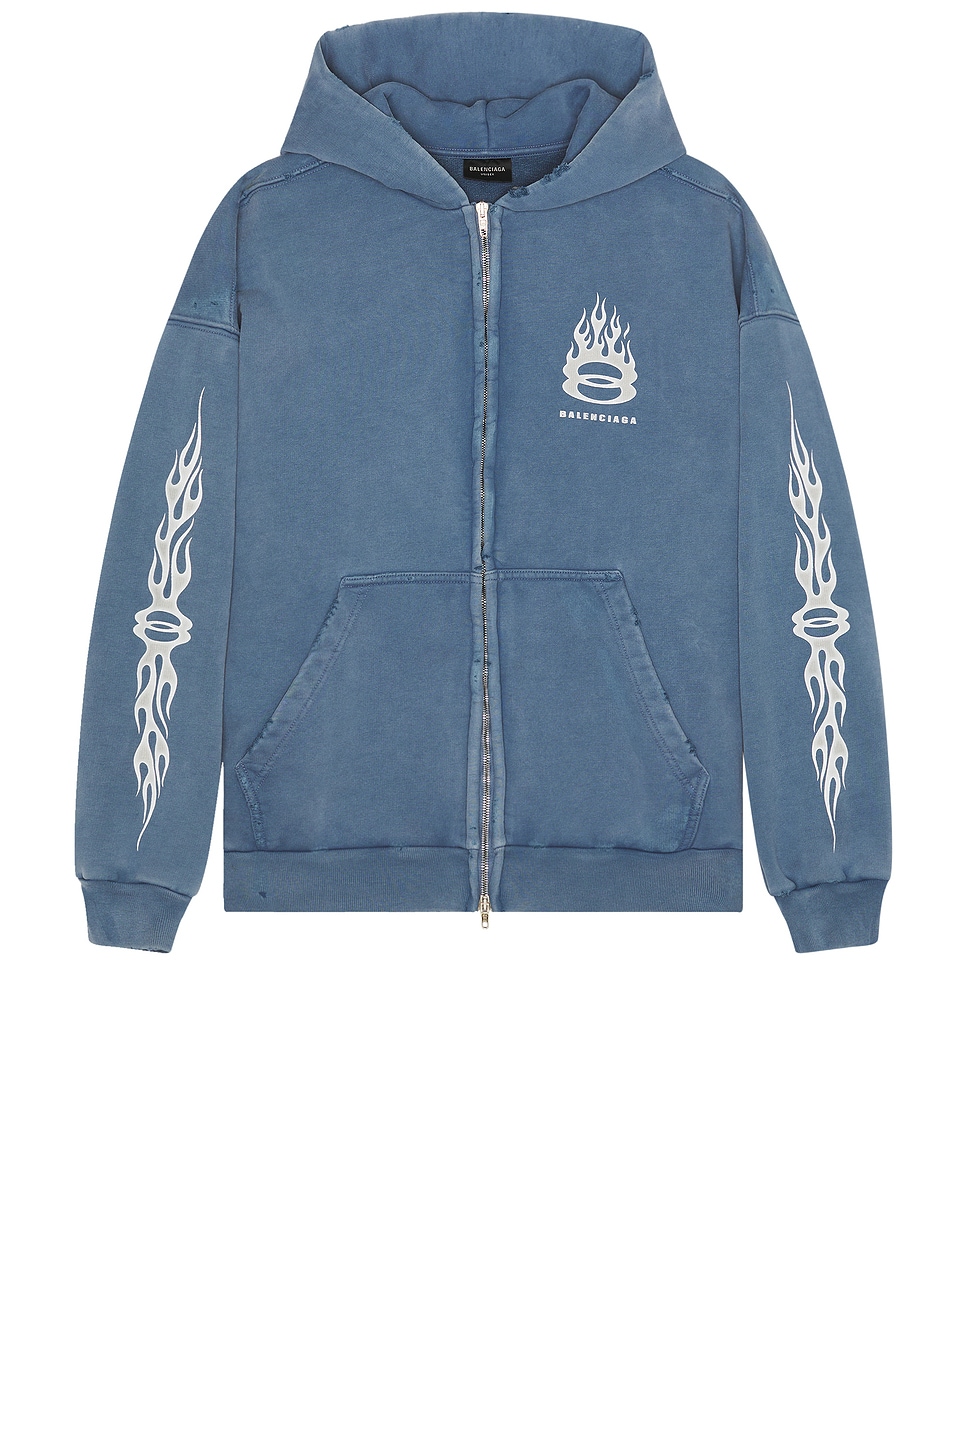 Image 1 of Balenciaga Zip-Up Hoodie in Washed Out Blue